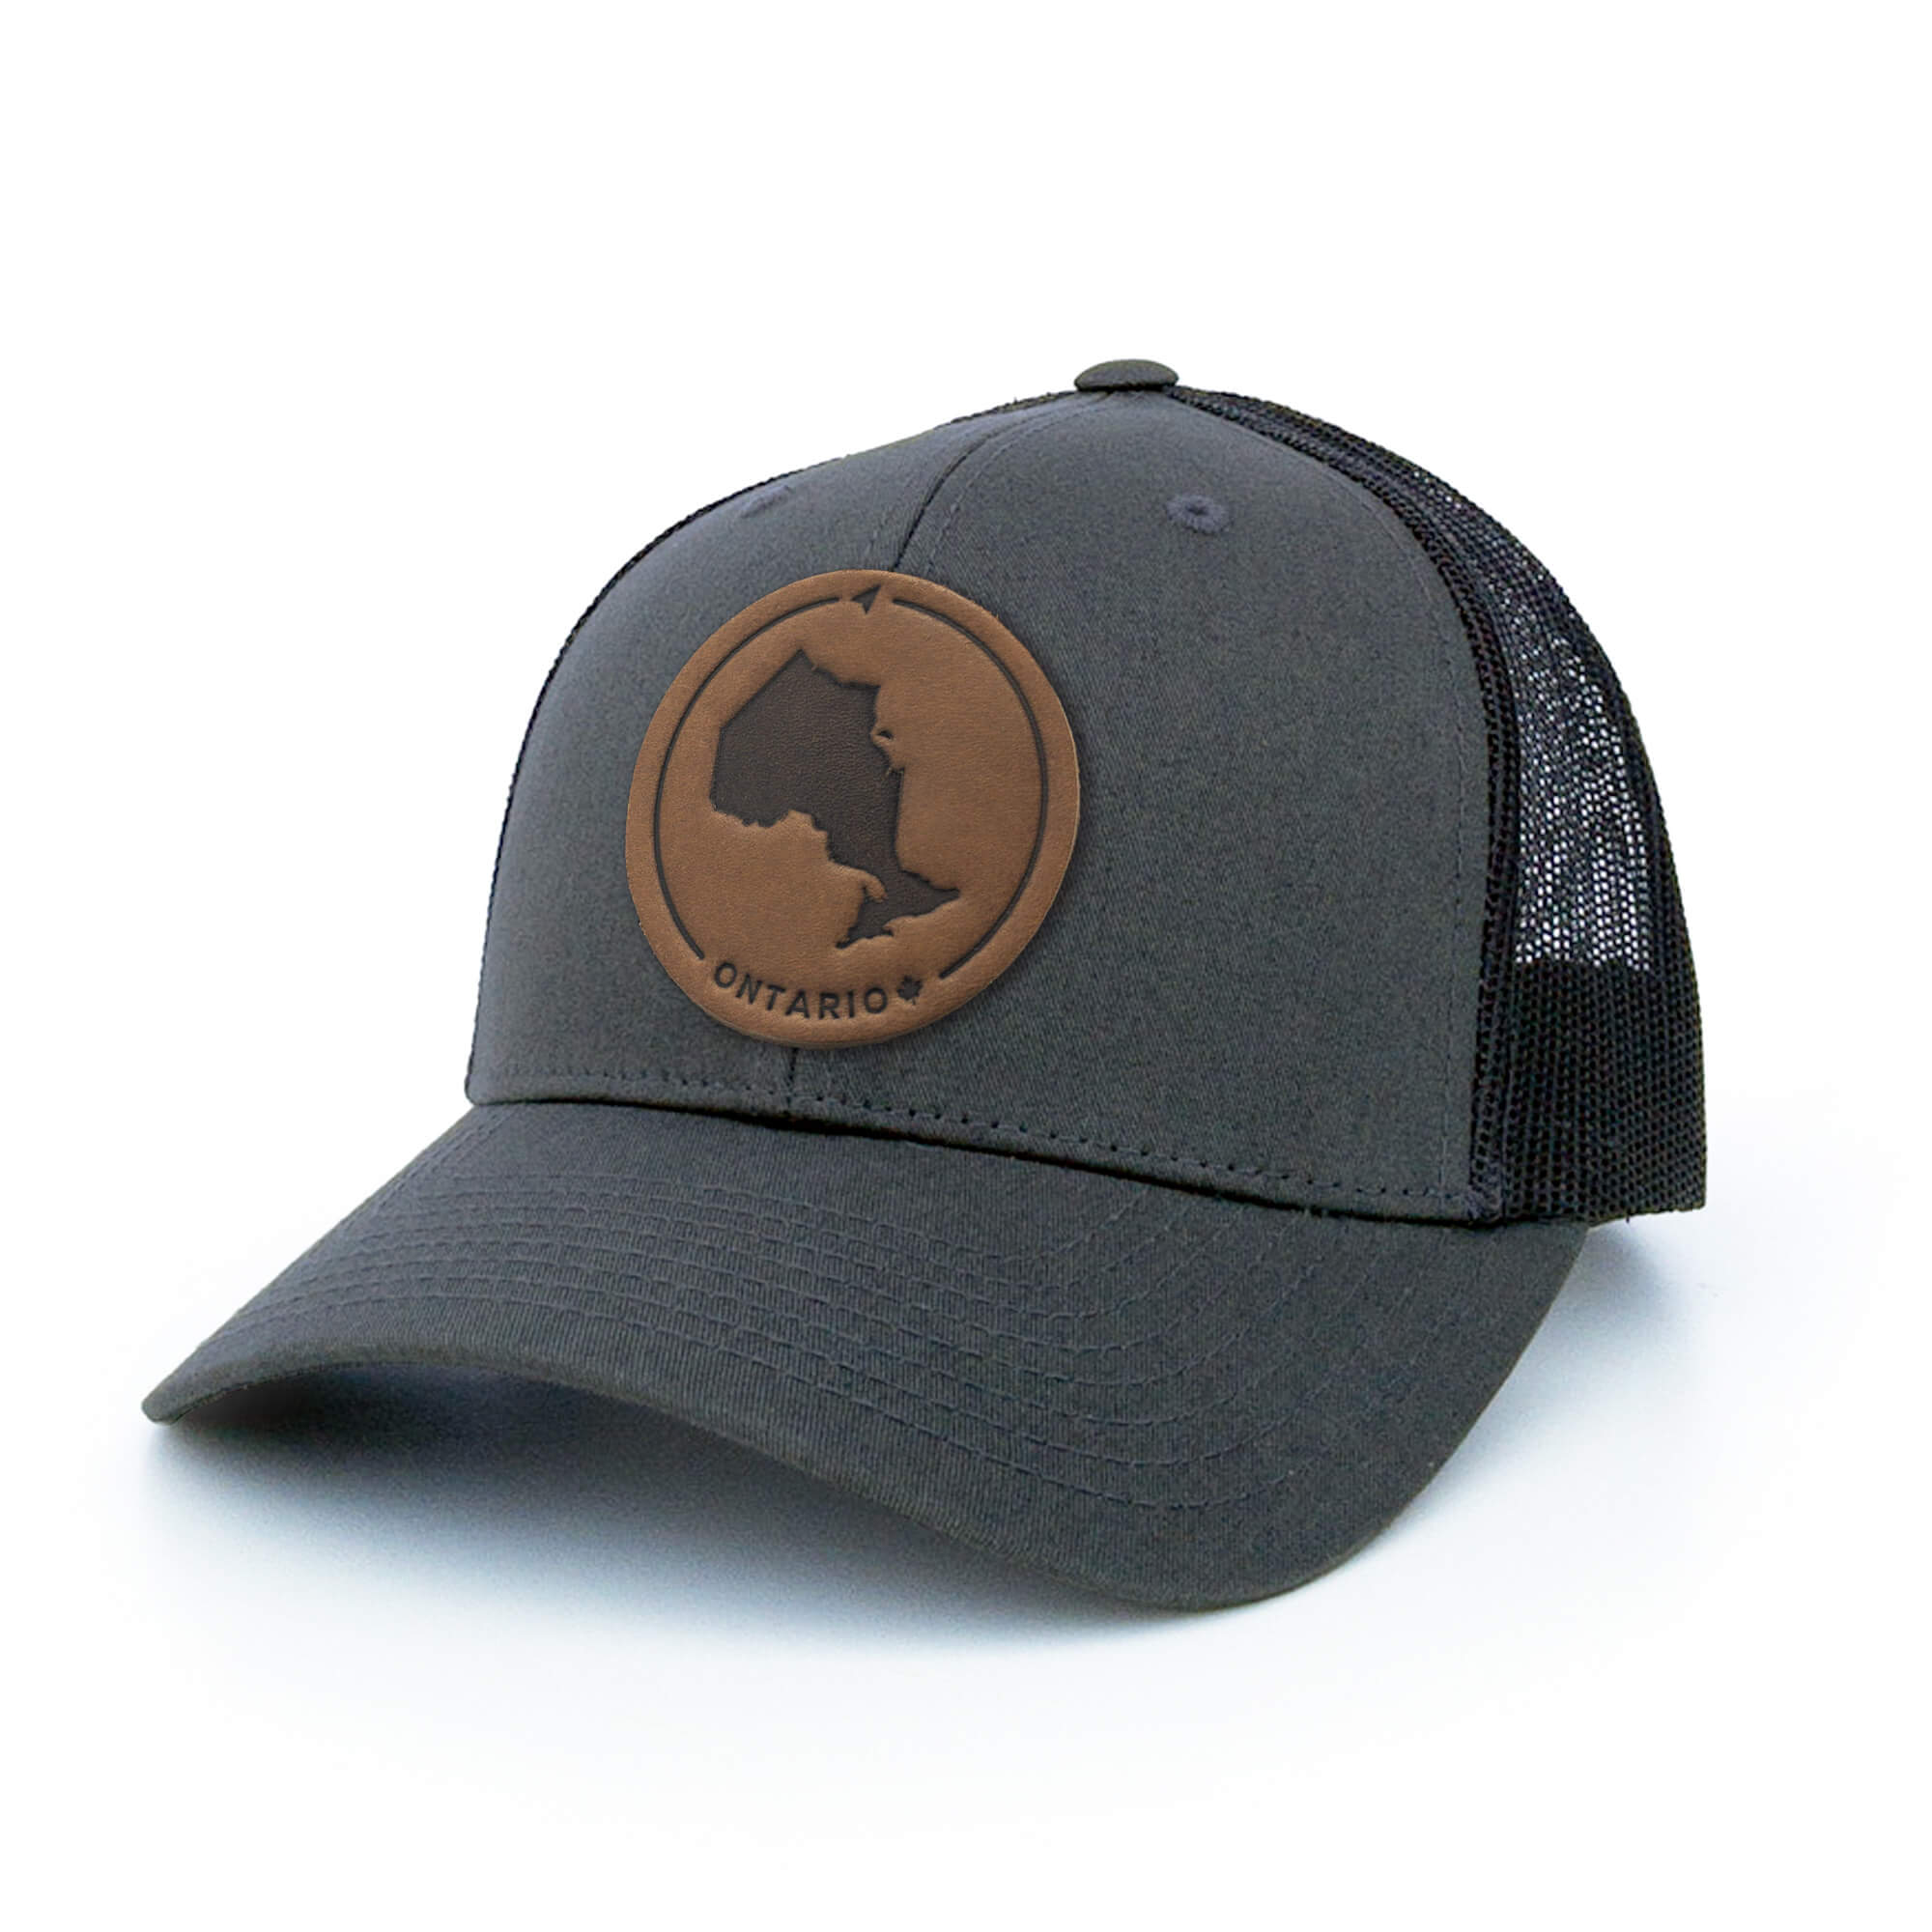 Charcoal trucker hat with full-grain leather patch of Ontario | BLACK-002-003, CHARC-002-003, NAVY-002-003, HGREY-002-003, MOSS-002-003, BROWN-002-003